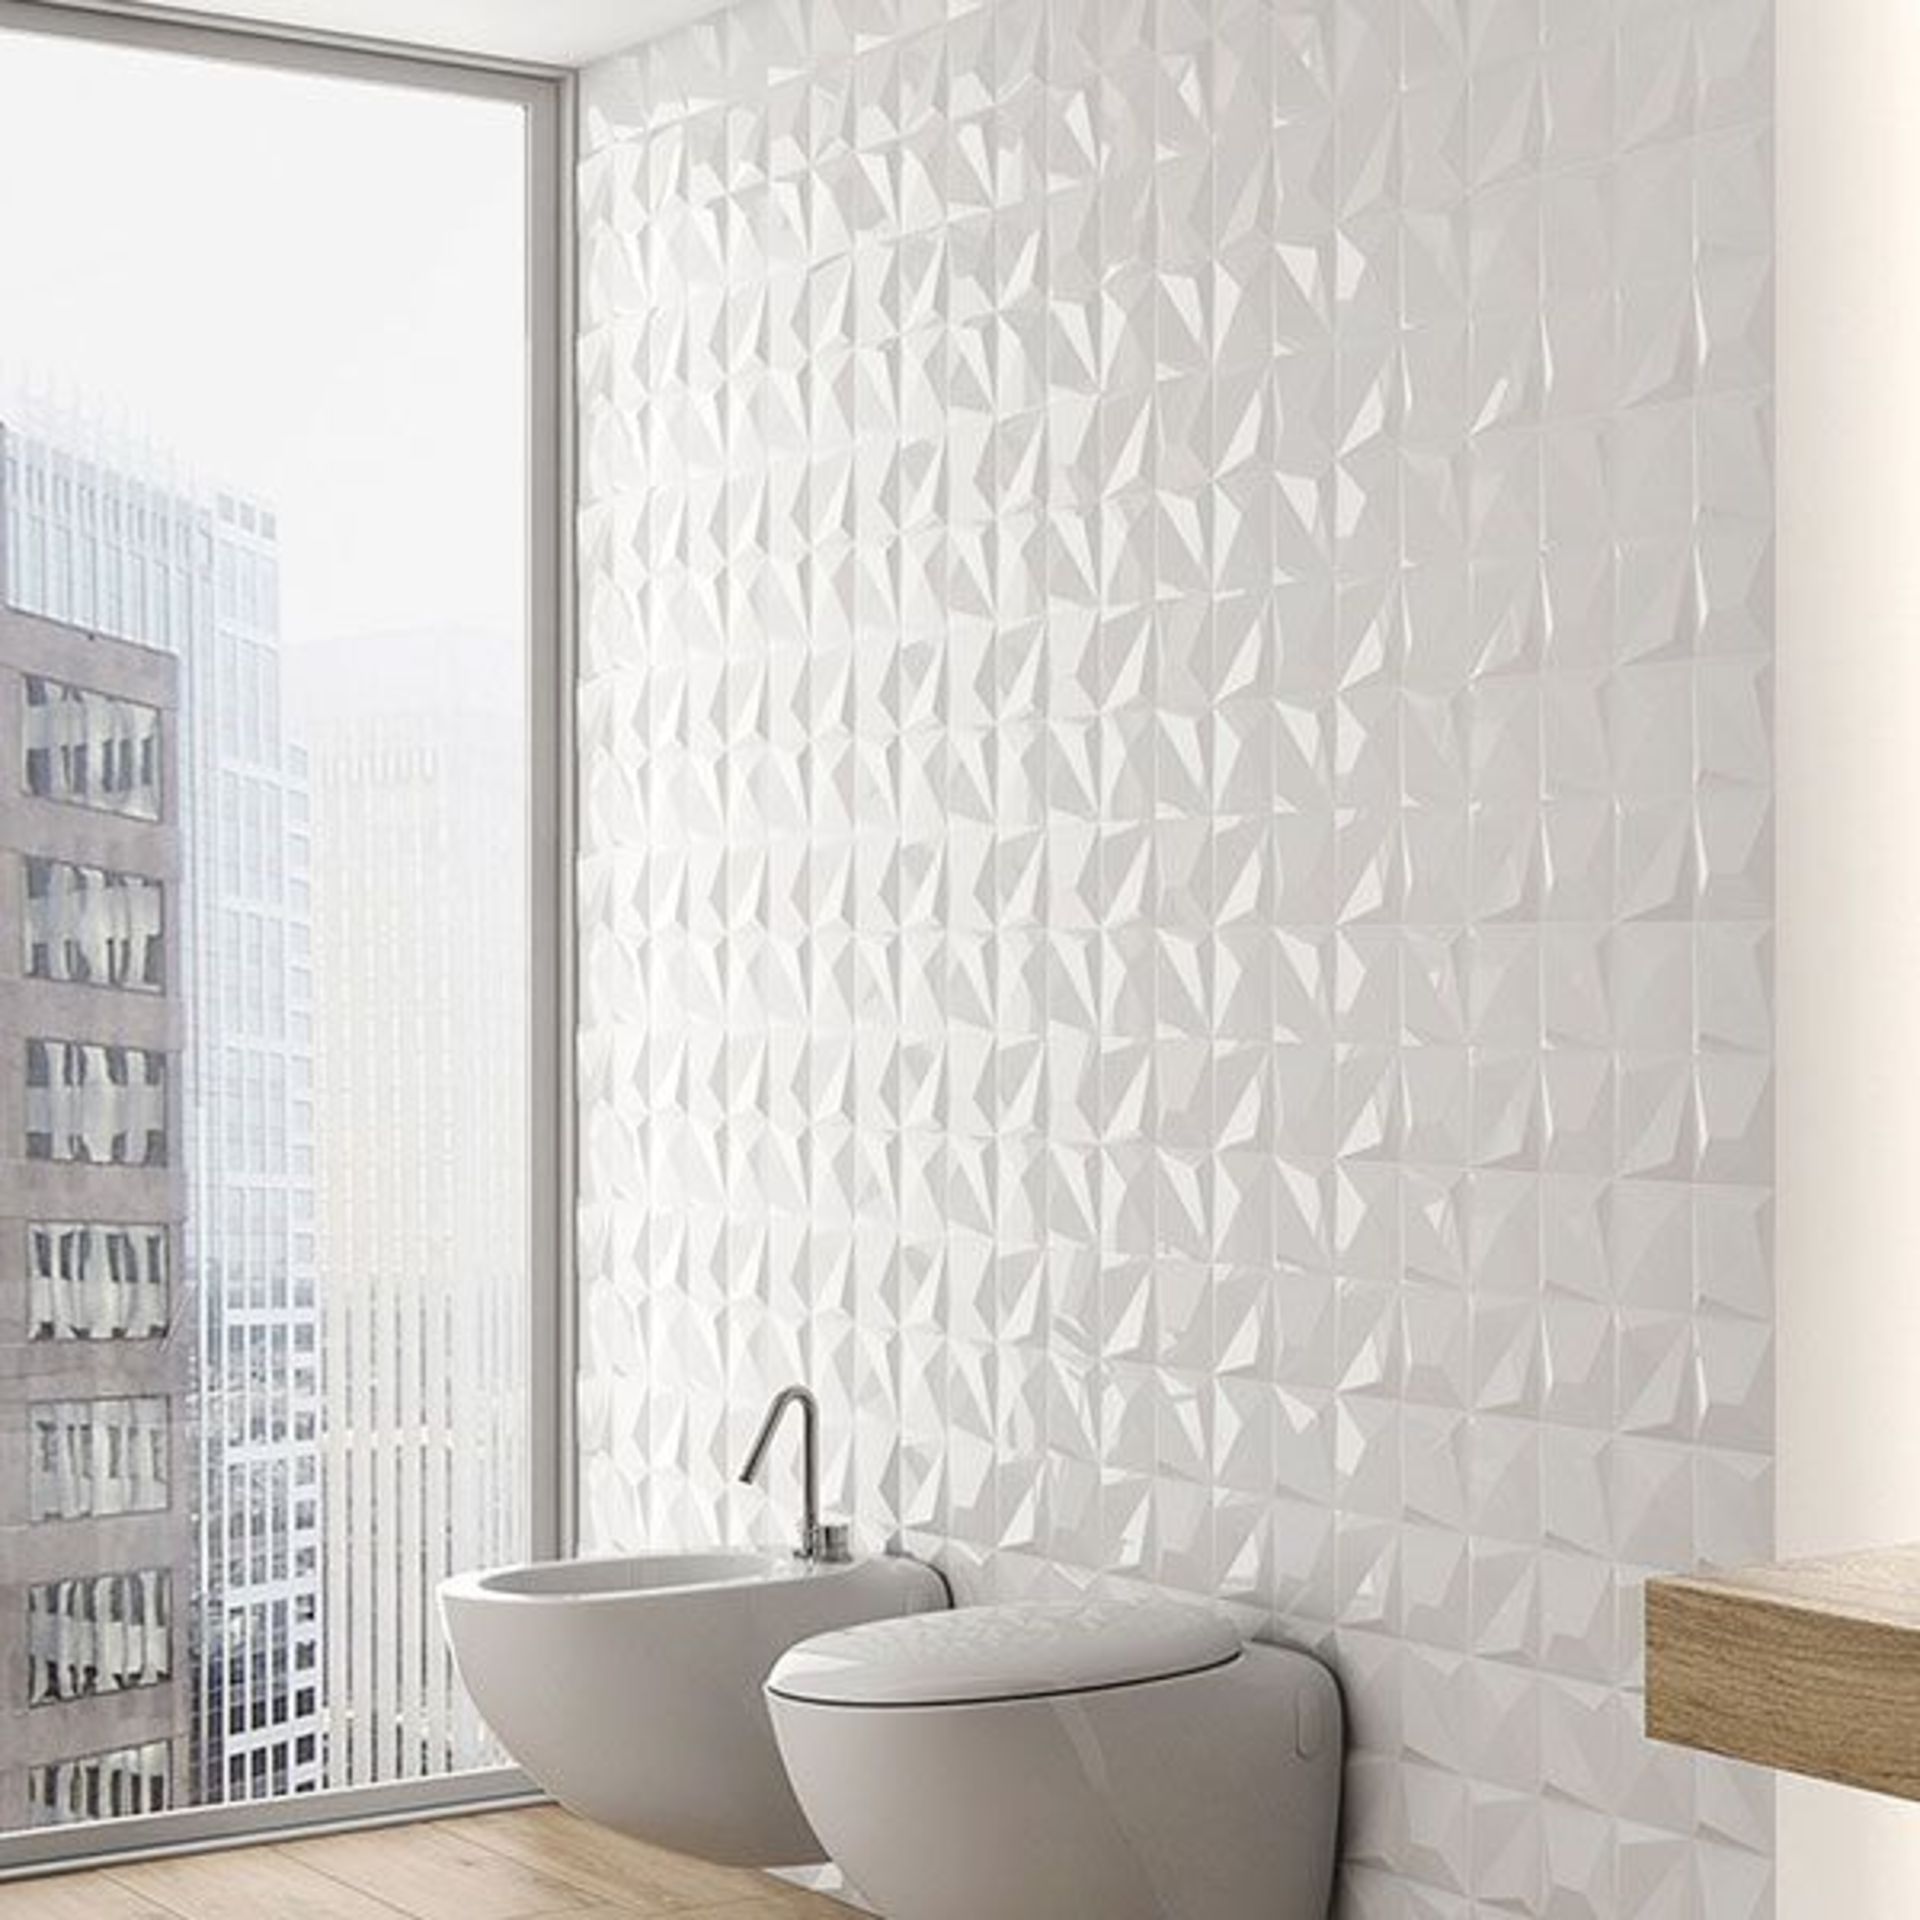 NEW 8.55 Square Meters of 3D White Star Effect Wall and Floor Tiles. 300x600mm per tile. 8mm ...